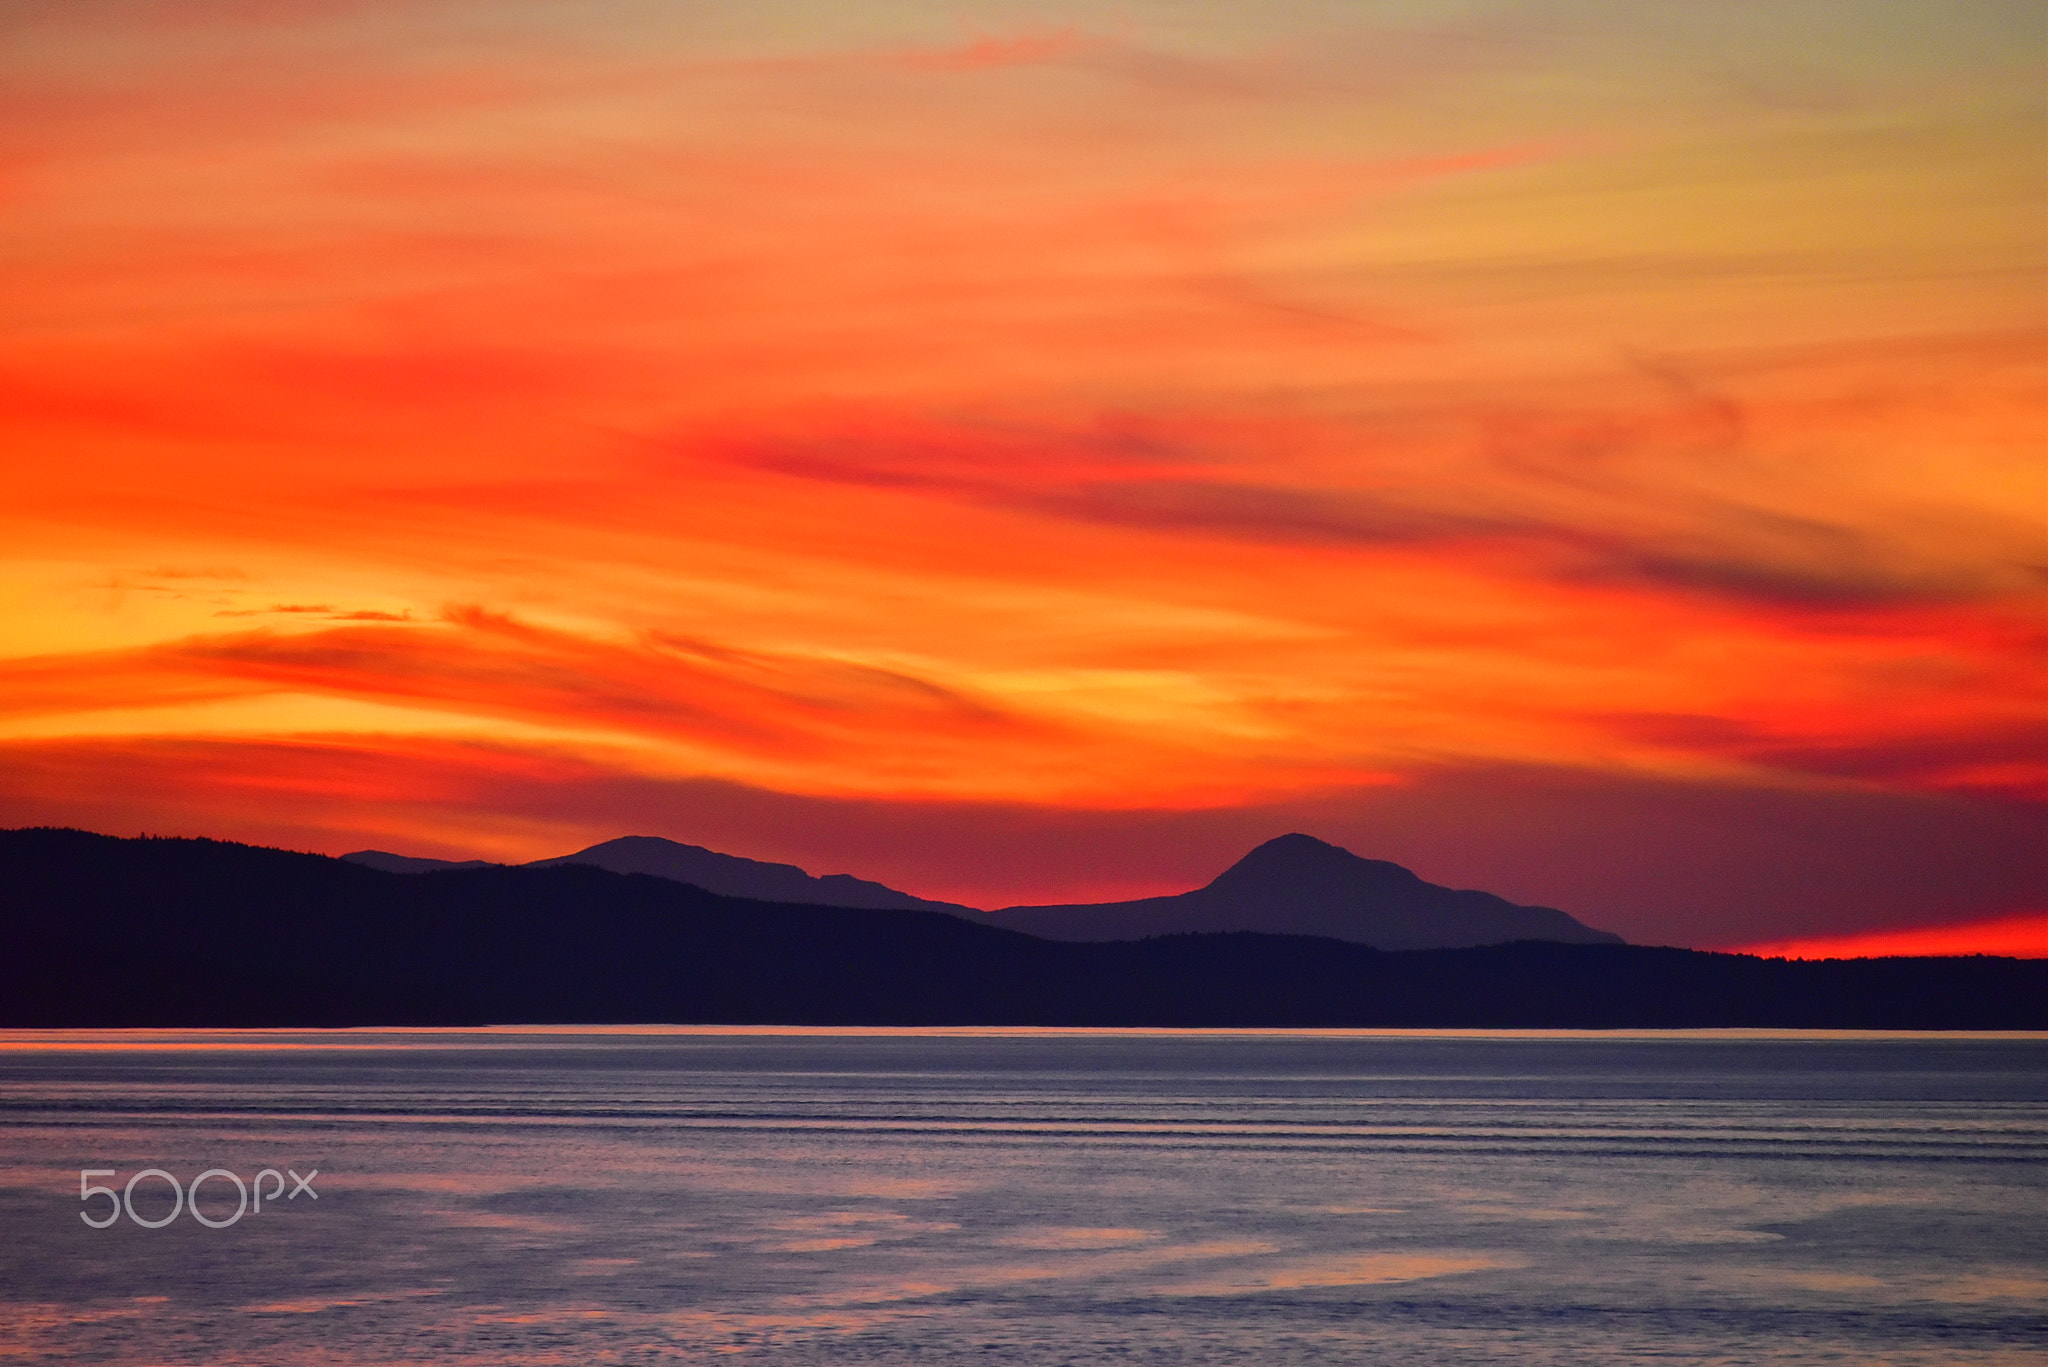 Sunset on BC Ferries by Brandy Saturley on 500px.com